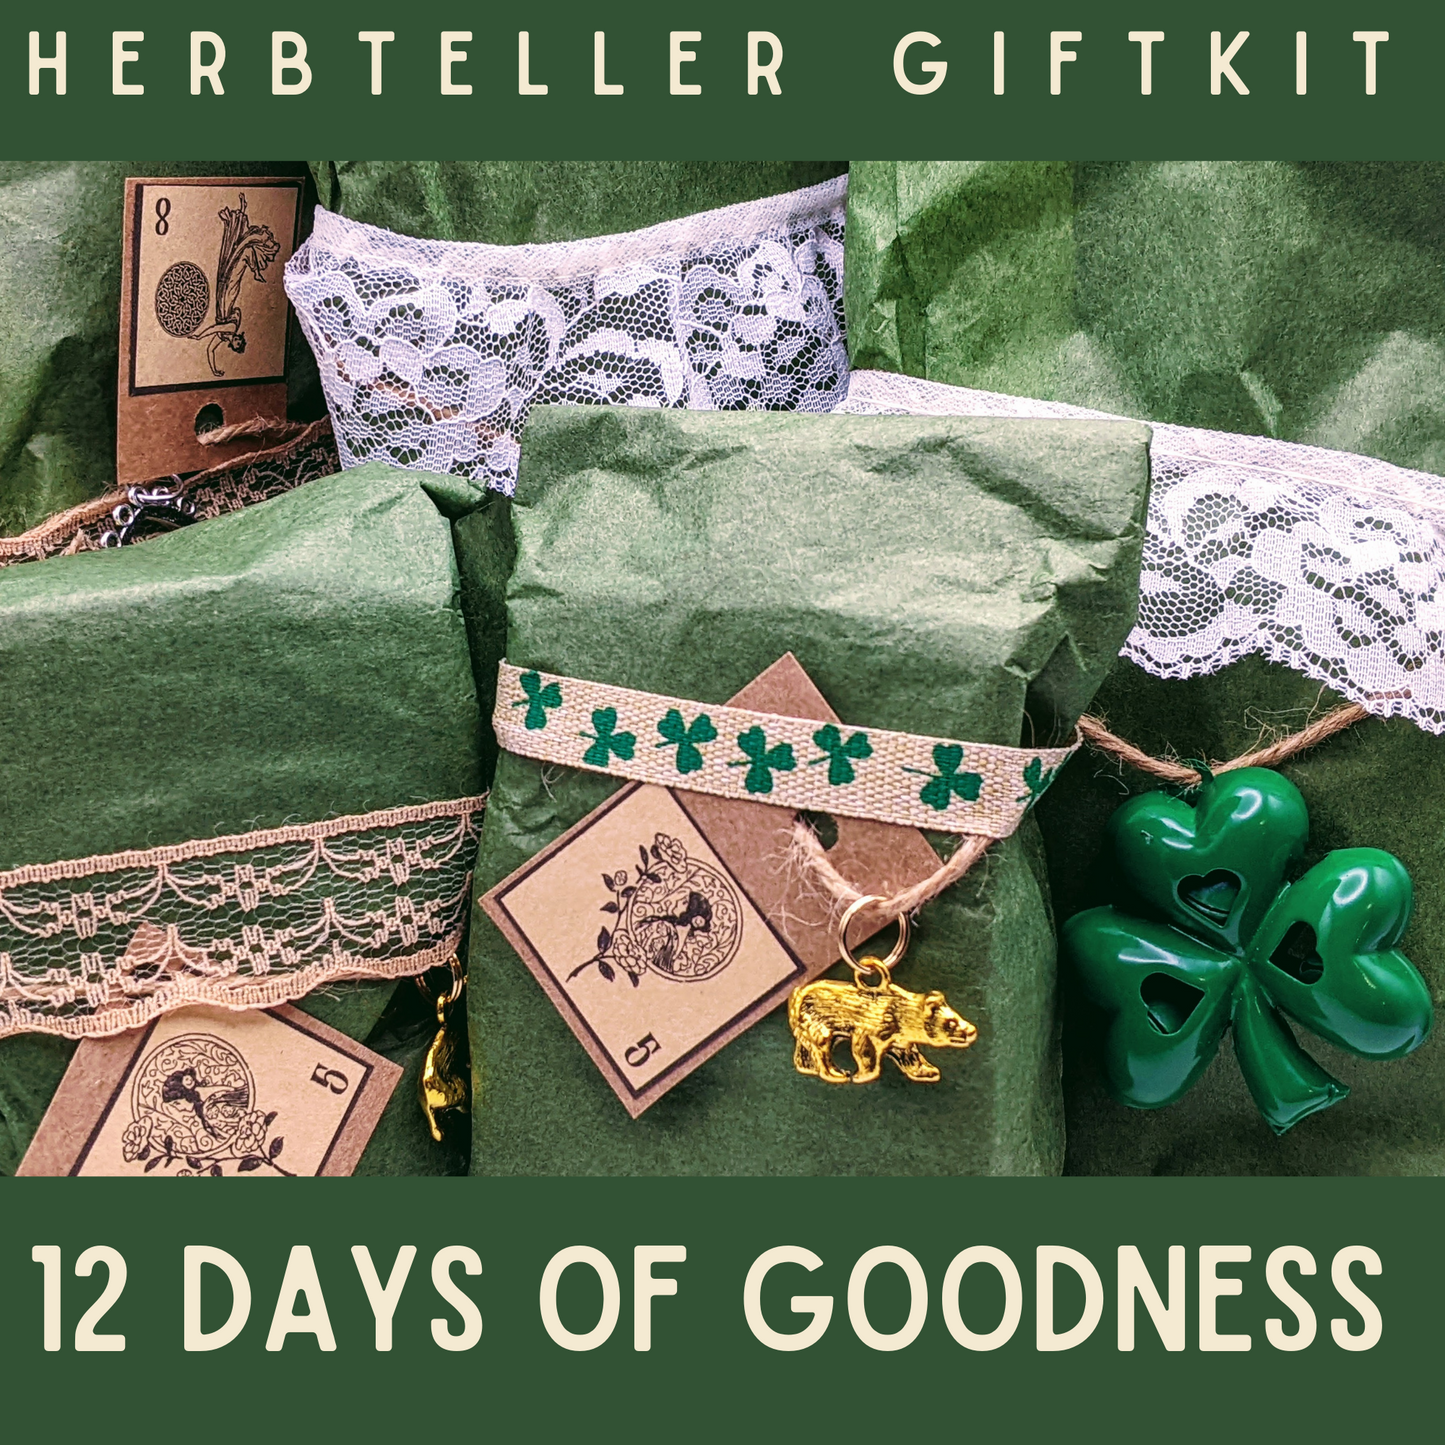 Celtic Witchy Gift Kit (7Day or12 Day Countdown) Herbteller Giftset